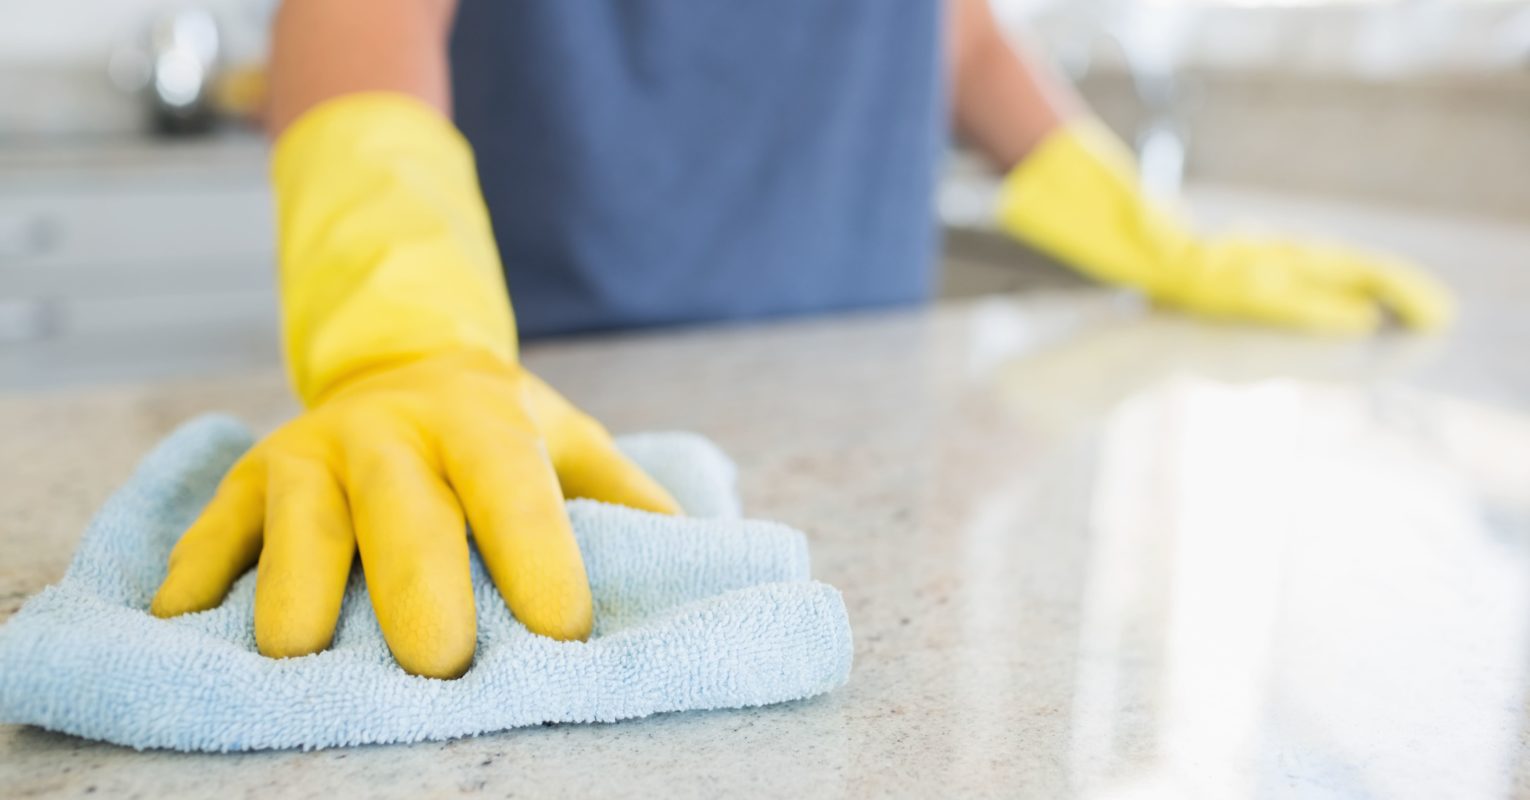 How To Clean Granite Countertops Bc, How To Clean Countertops